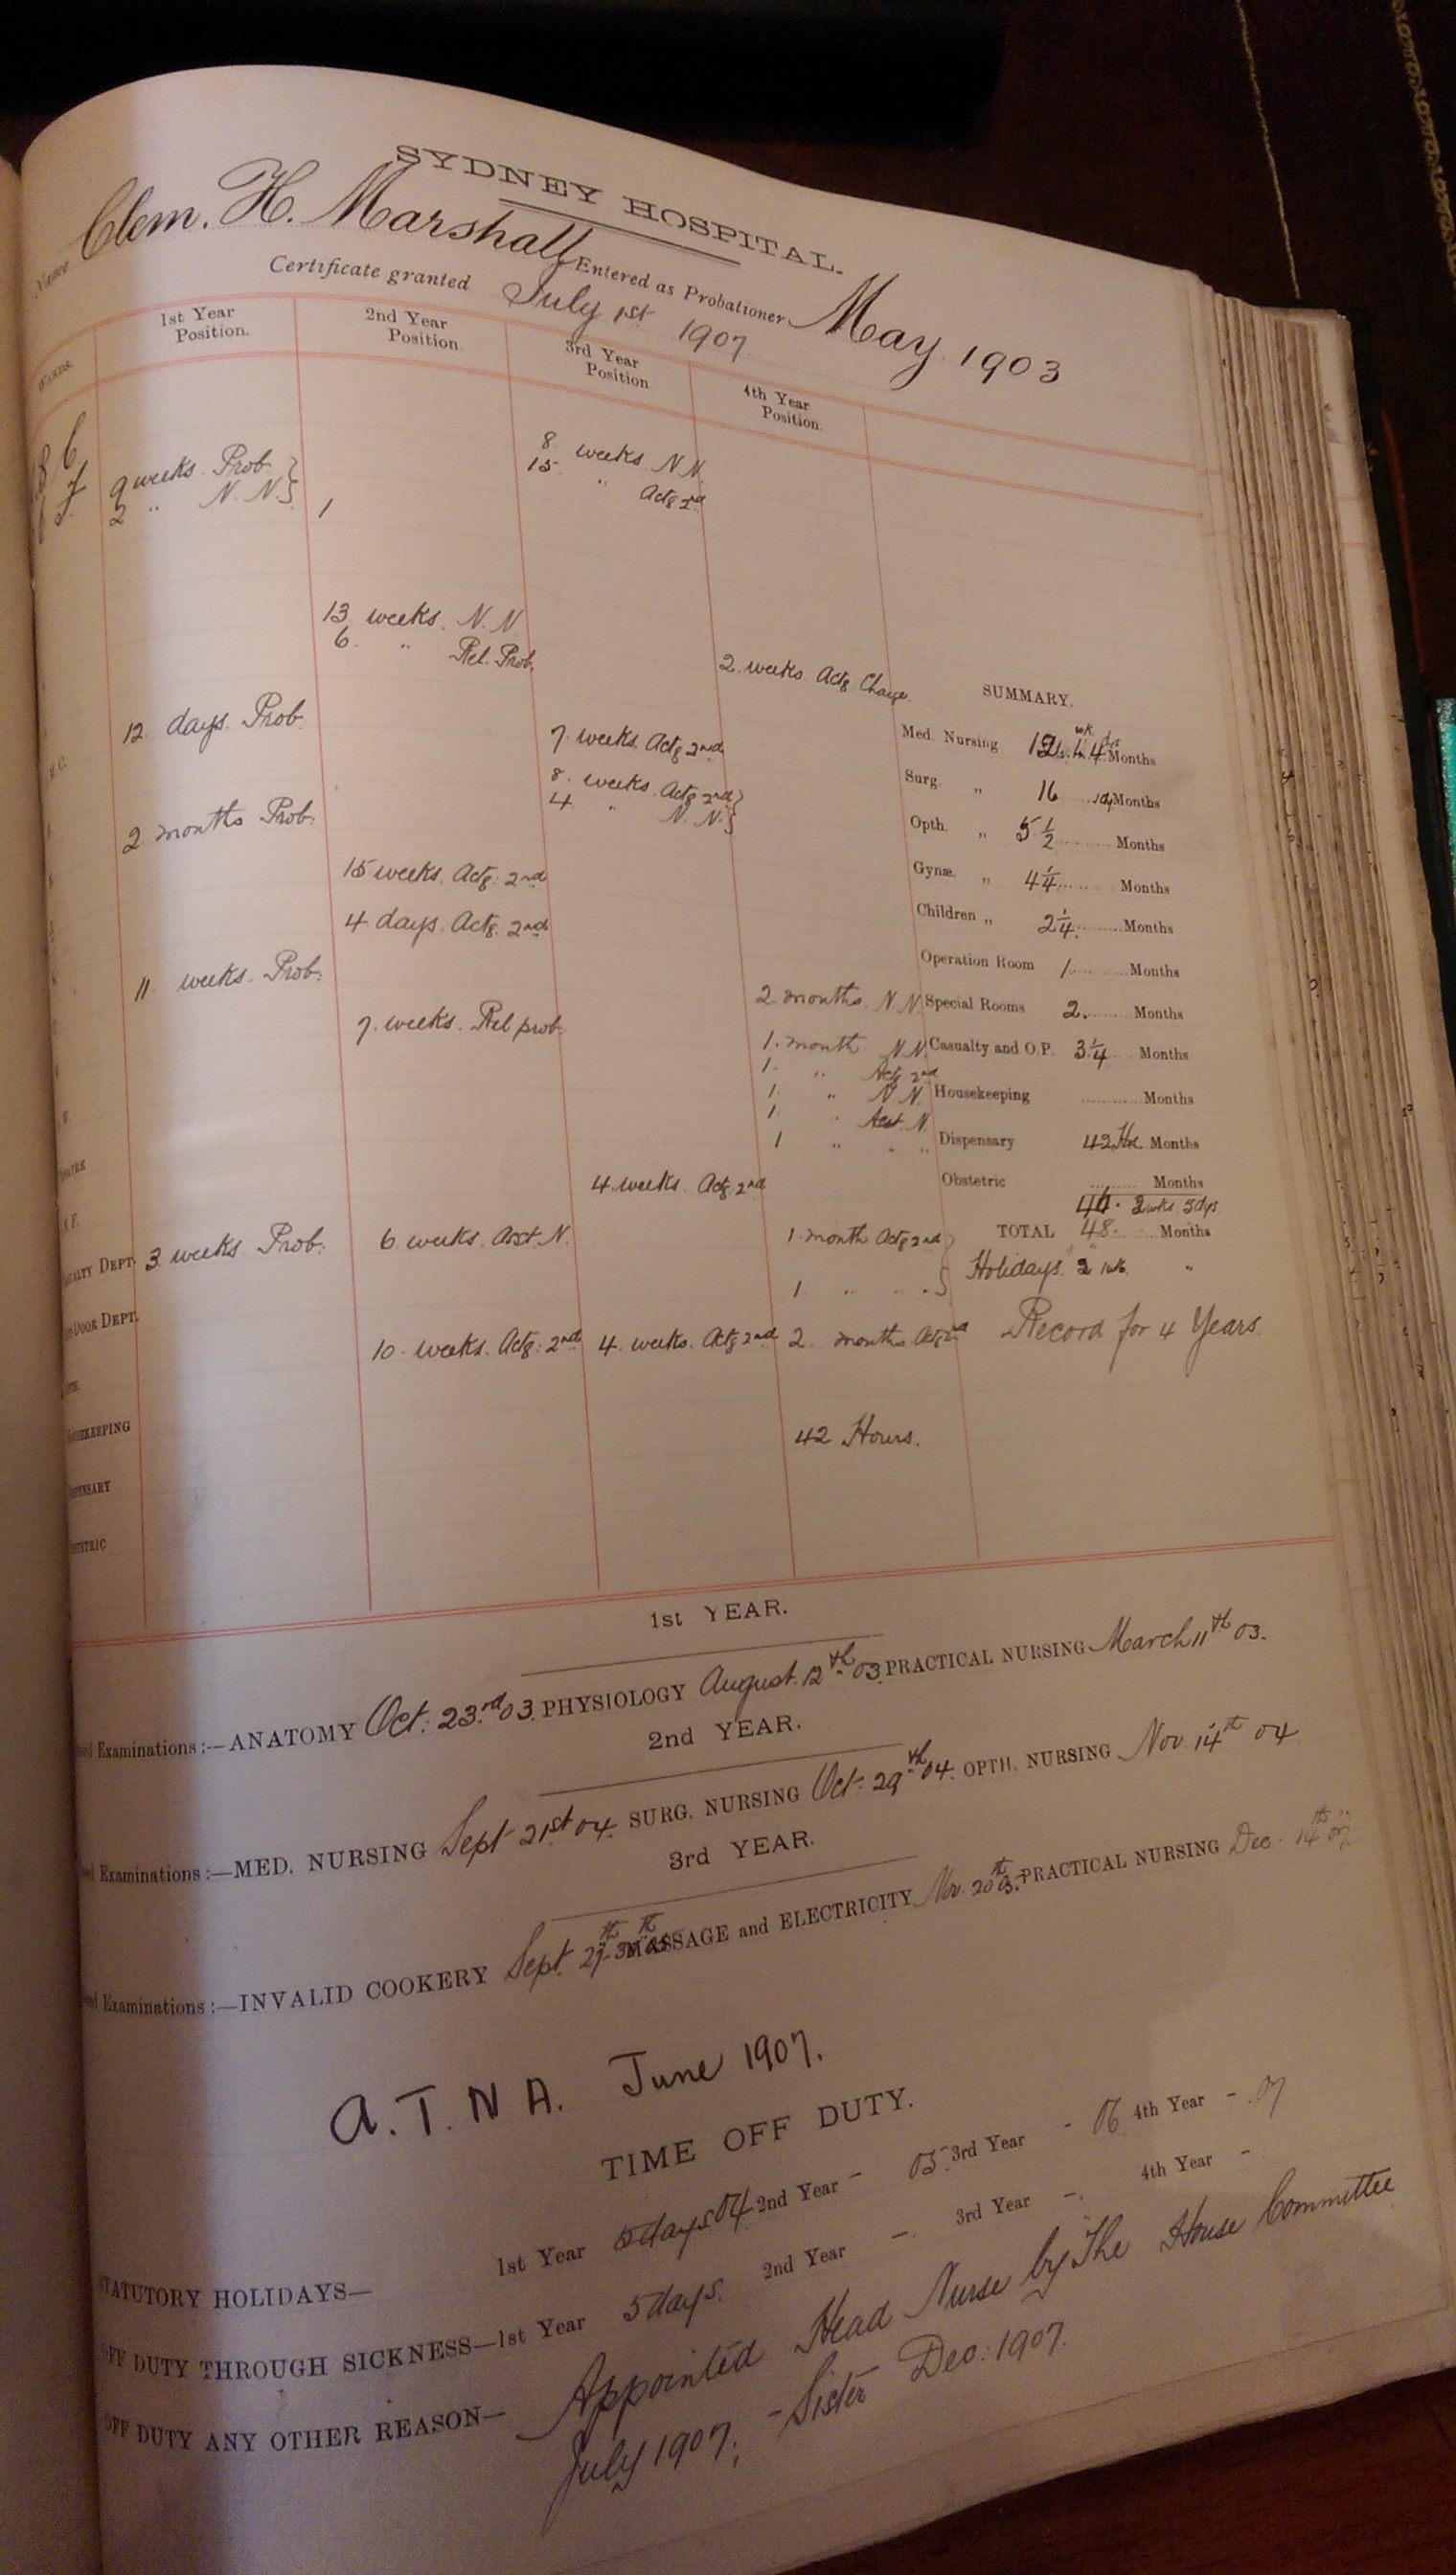 CLEMENTINA MARSHALL EMPLOYMENT PAGE OPEN IN MATRONS DIARY 1903 FULL DETAILS 